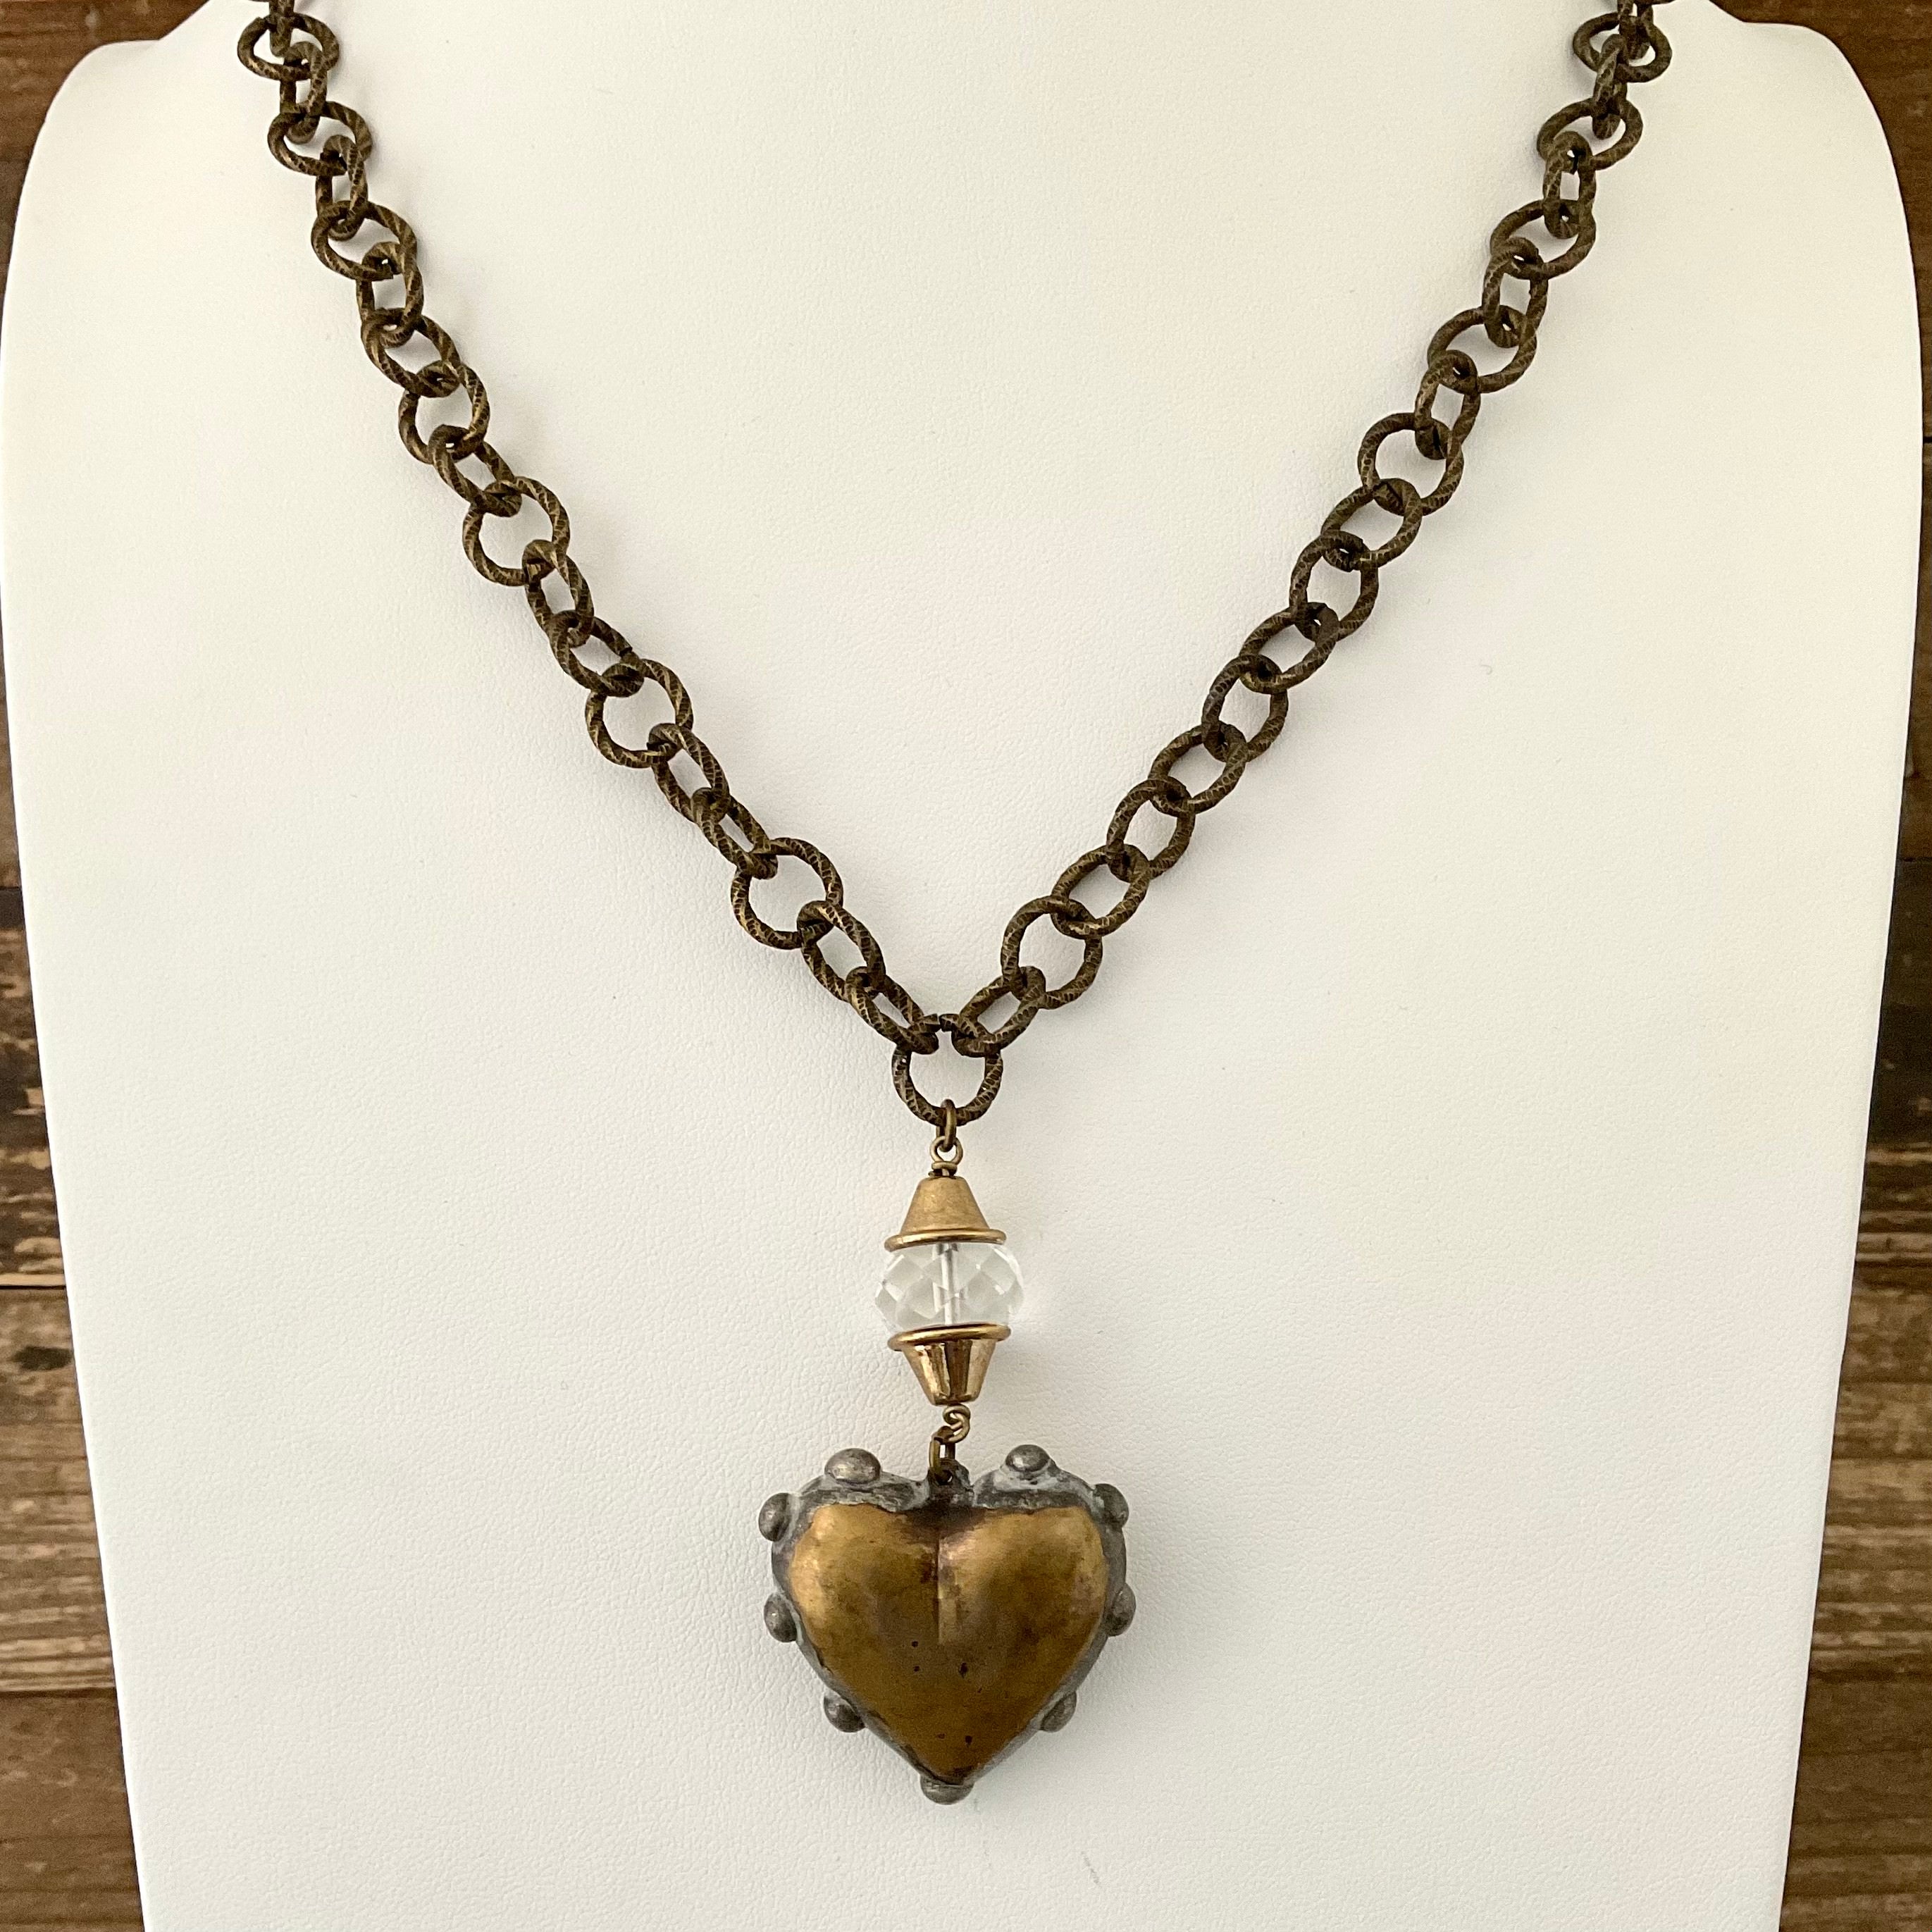 Vintage Crystal and Rustic Soldered Heart Necklace 36"